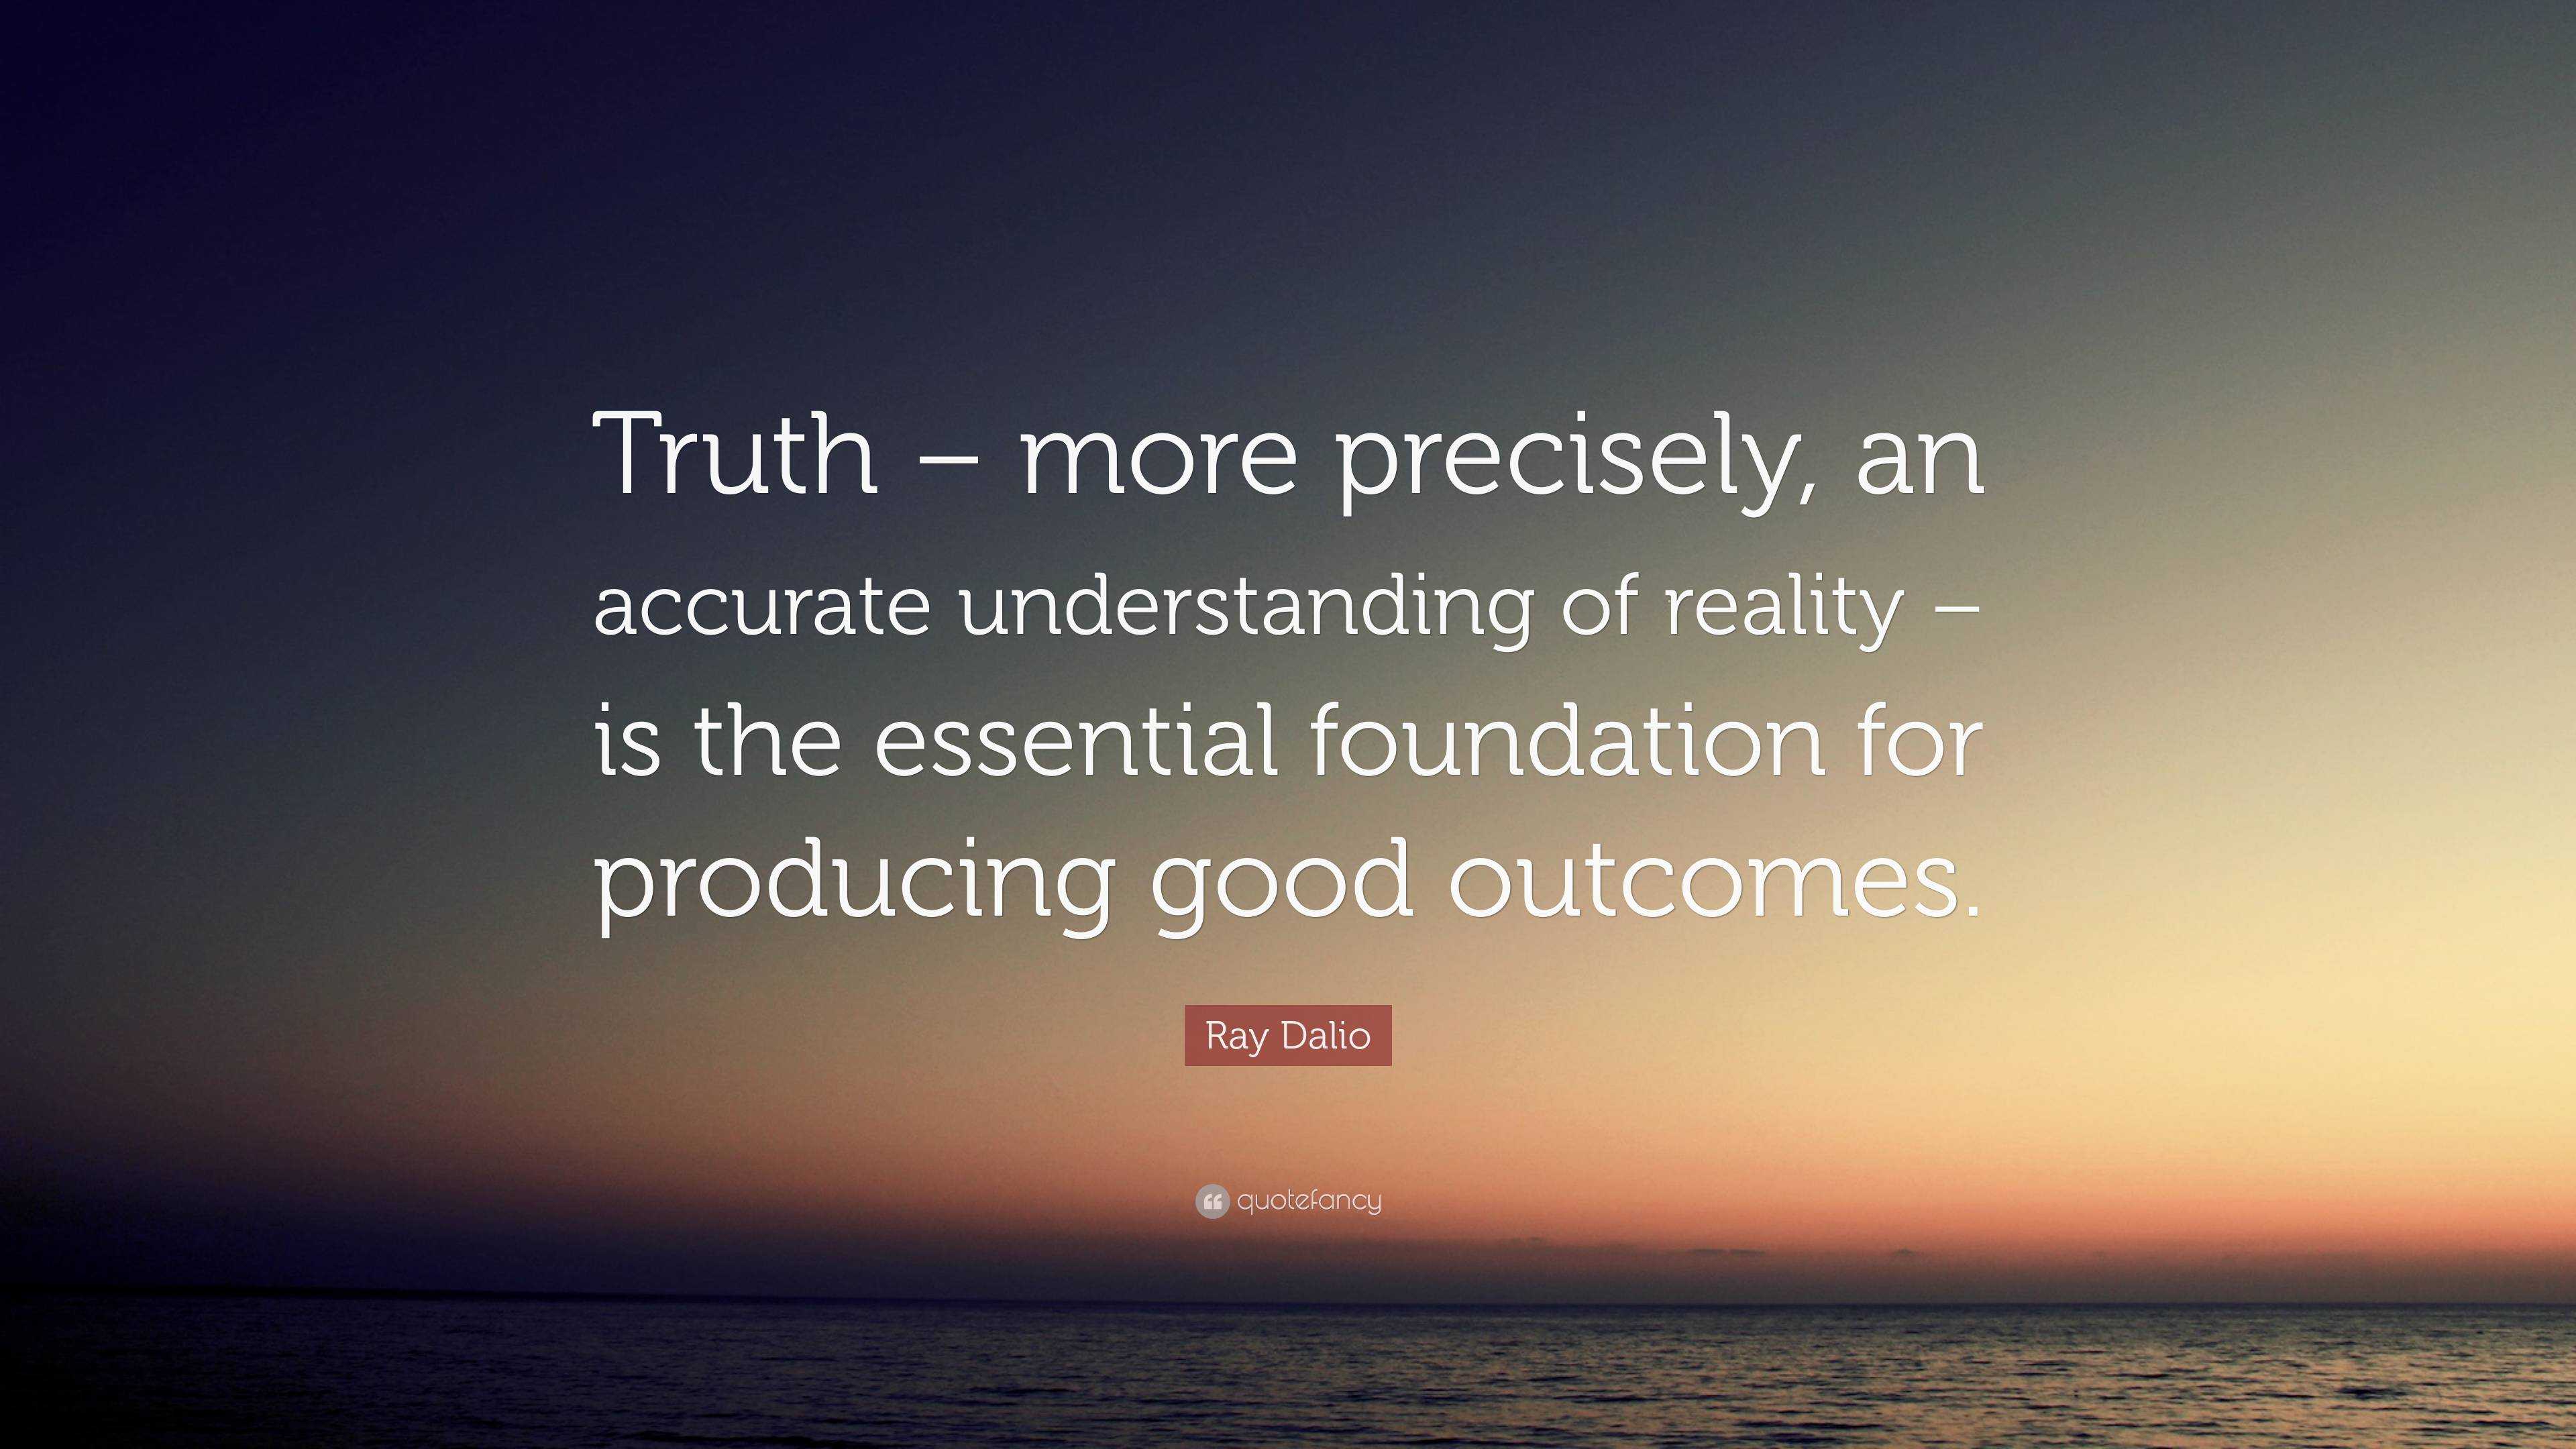 6380725 Ray Dalio Quote Truth more precisely an accurate understanding of